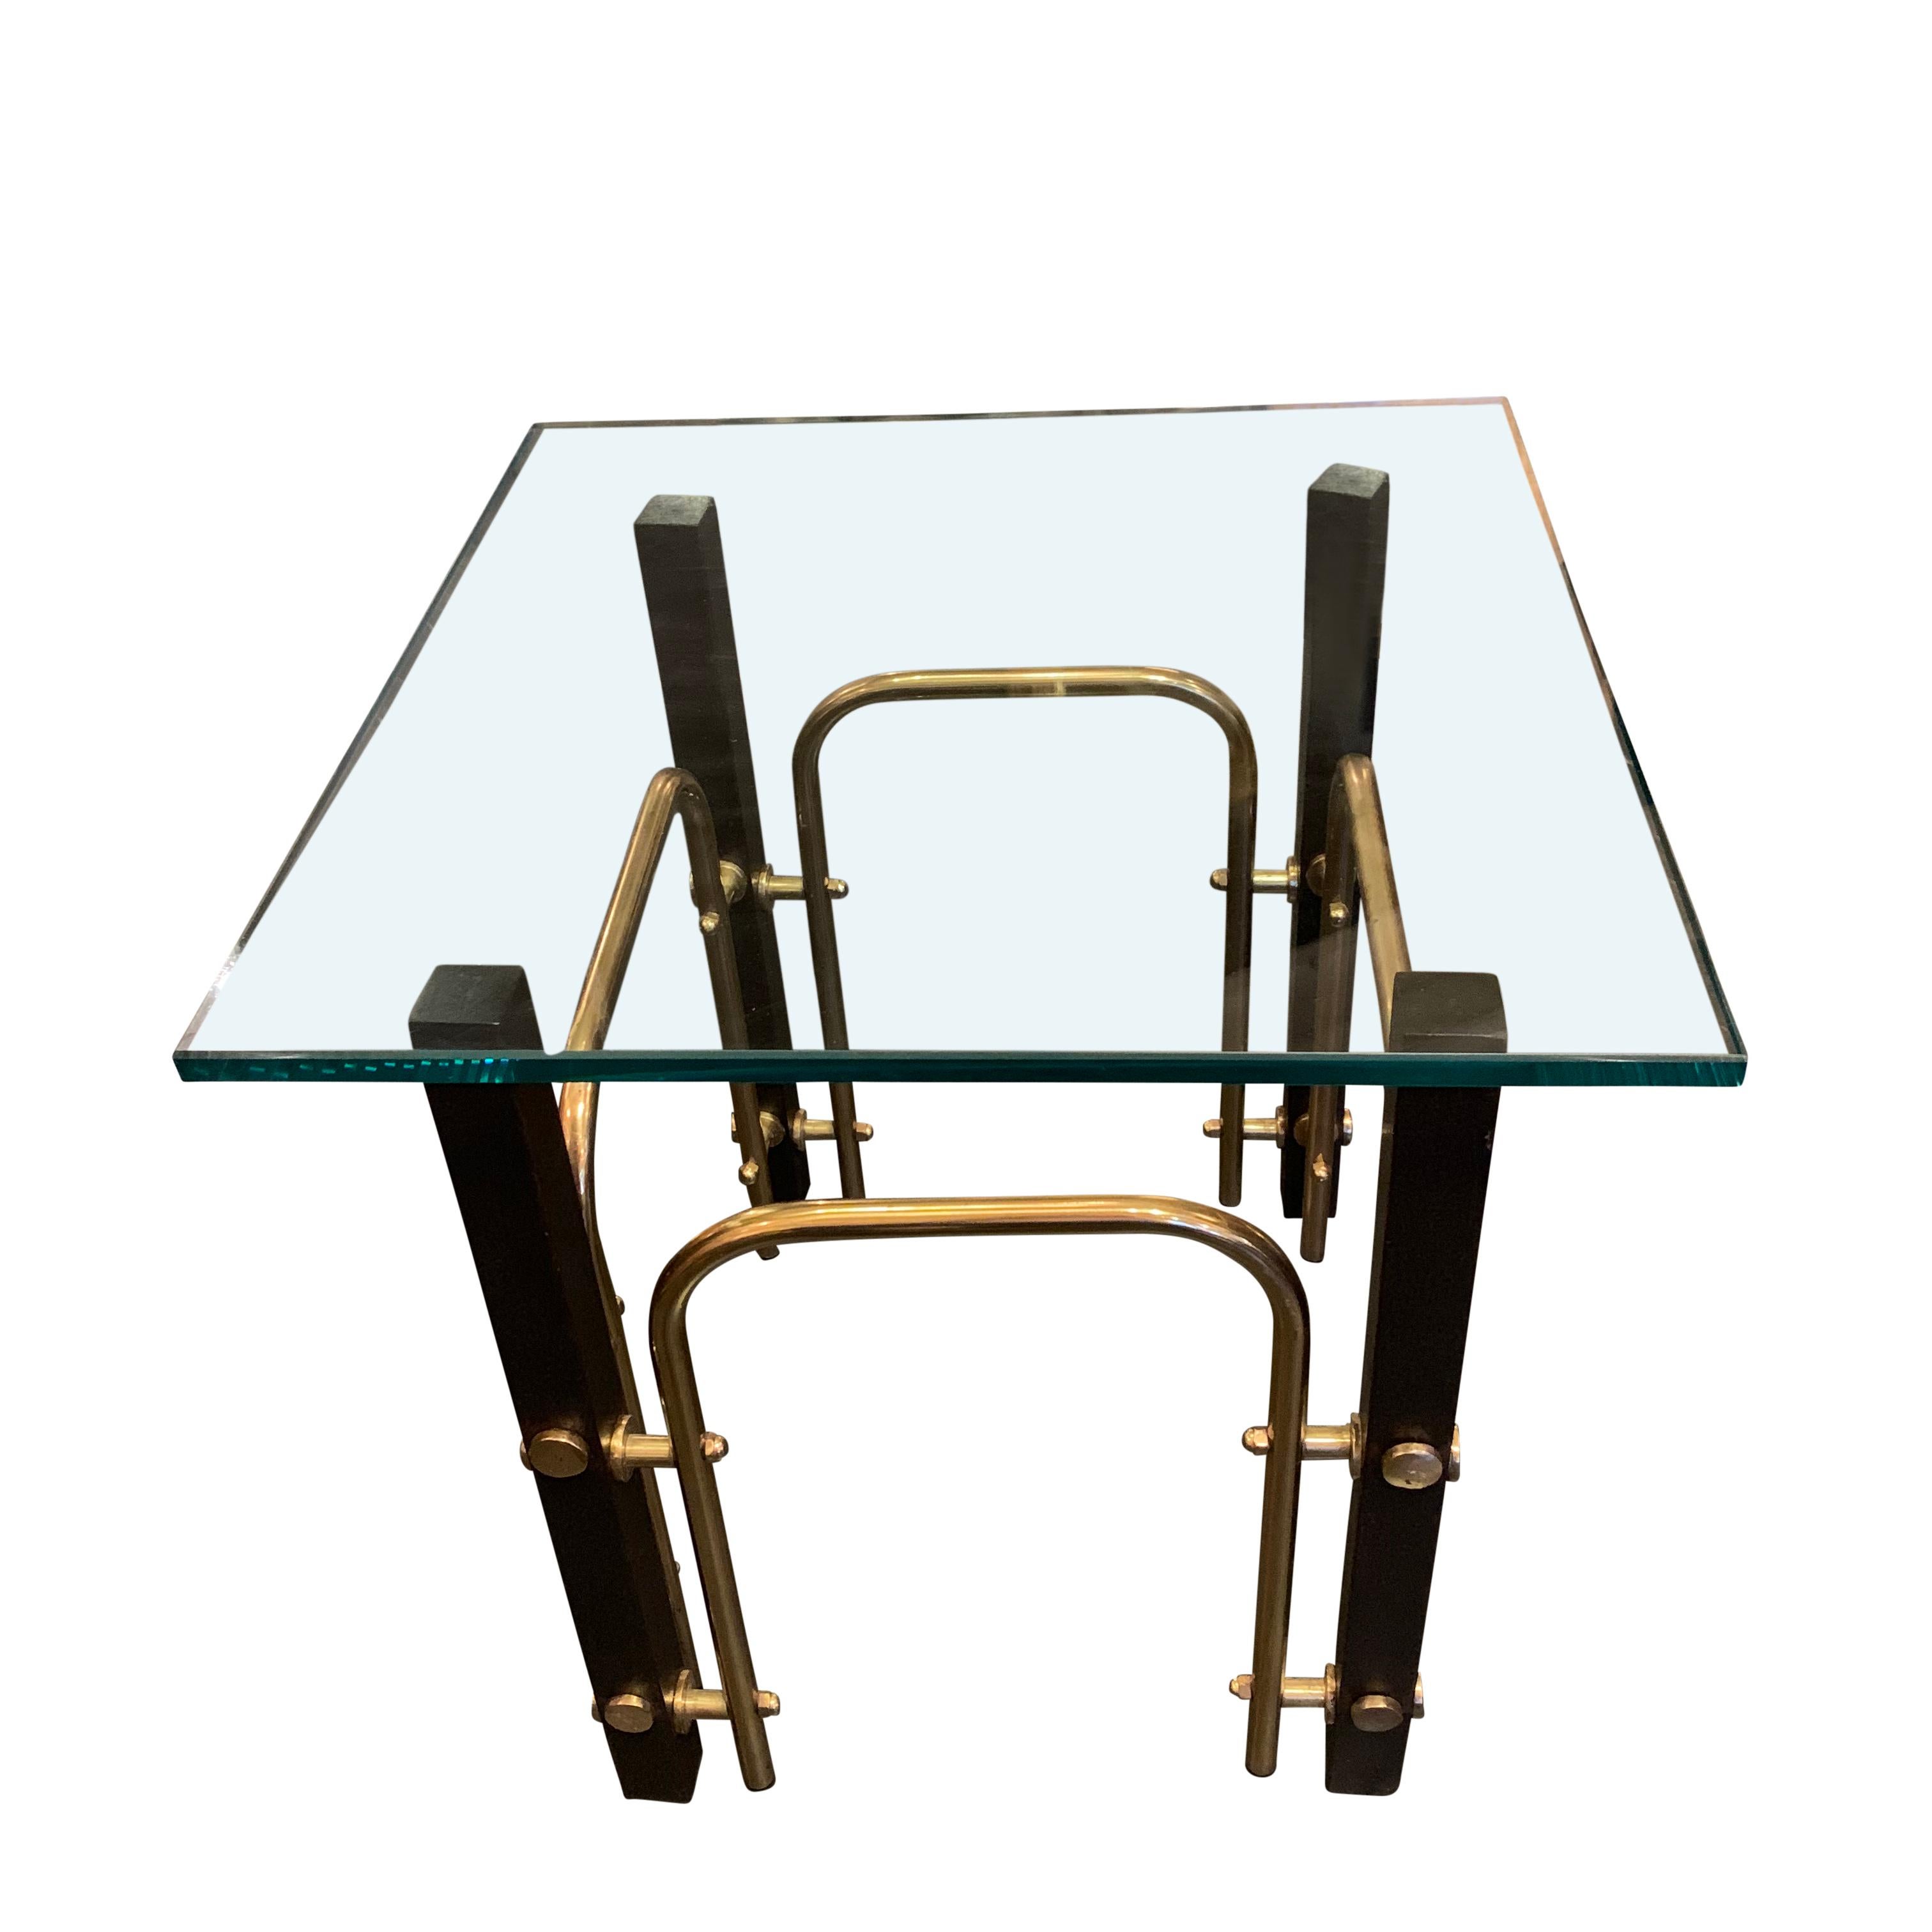 Midcentury French pair of coffee tables with ebonized wood and brass tubing details.
New square glass tops.
 